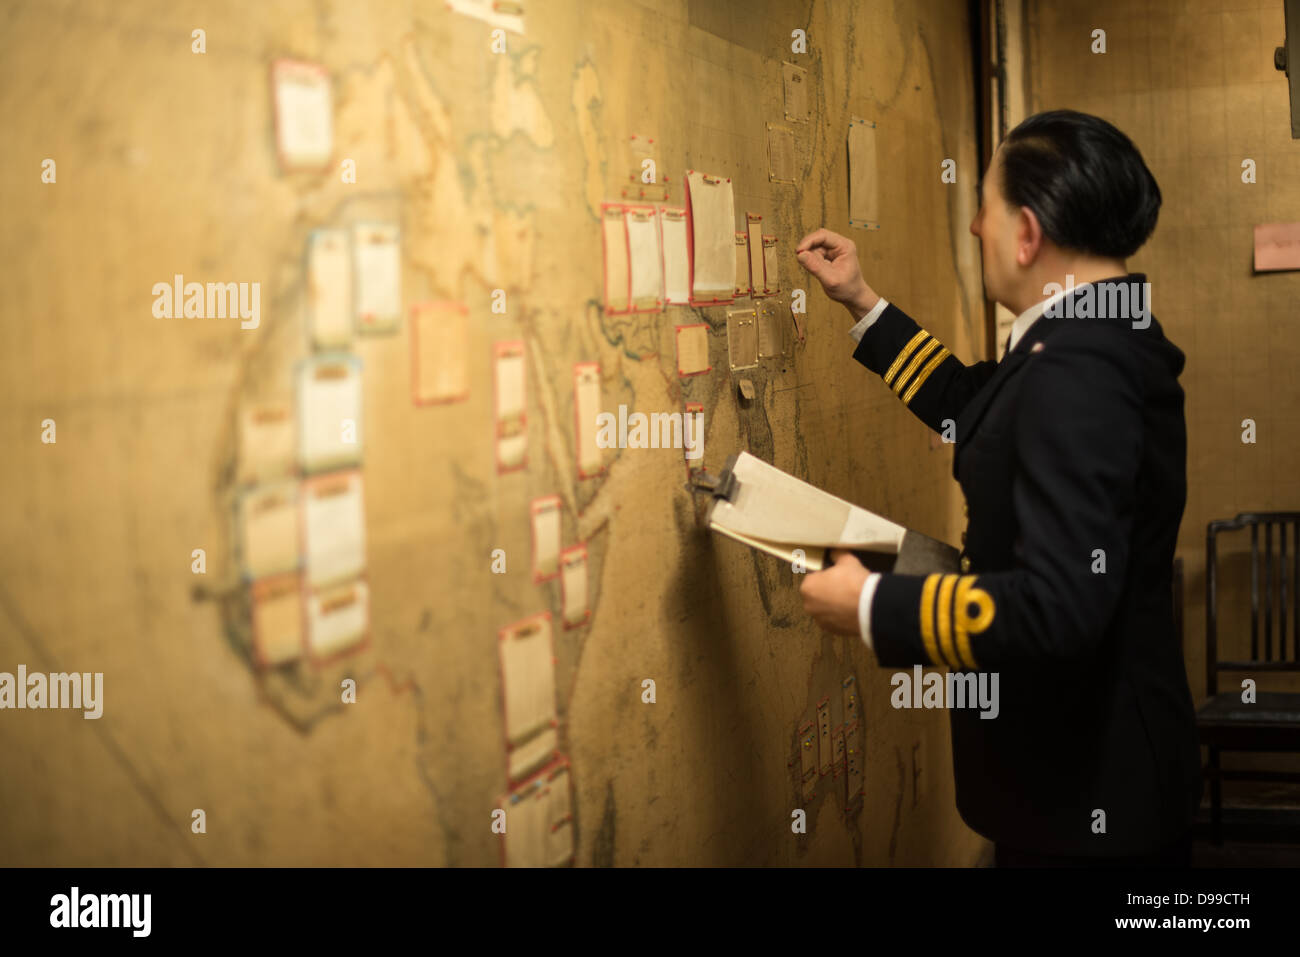 LONDON, UK - A manequin of a military officer updating one of the large wall maps in the Map Room at the Churchill War Rooms in London. The museum, one of five branches of the Imerial War Museums, preserves the World War II underground command bunker used by British Prime Minister Winston Churchill. Its cramped quarters were constructed from a converting a storage basement in the Treasury Building in Whitehall, London. Being underground, and under an unusually sturdy building, the Cabinet War Rooms were afforded some protection from the bombs falling above during the Blitz. Stock Photo